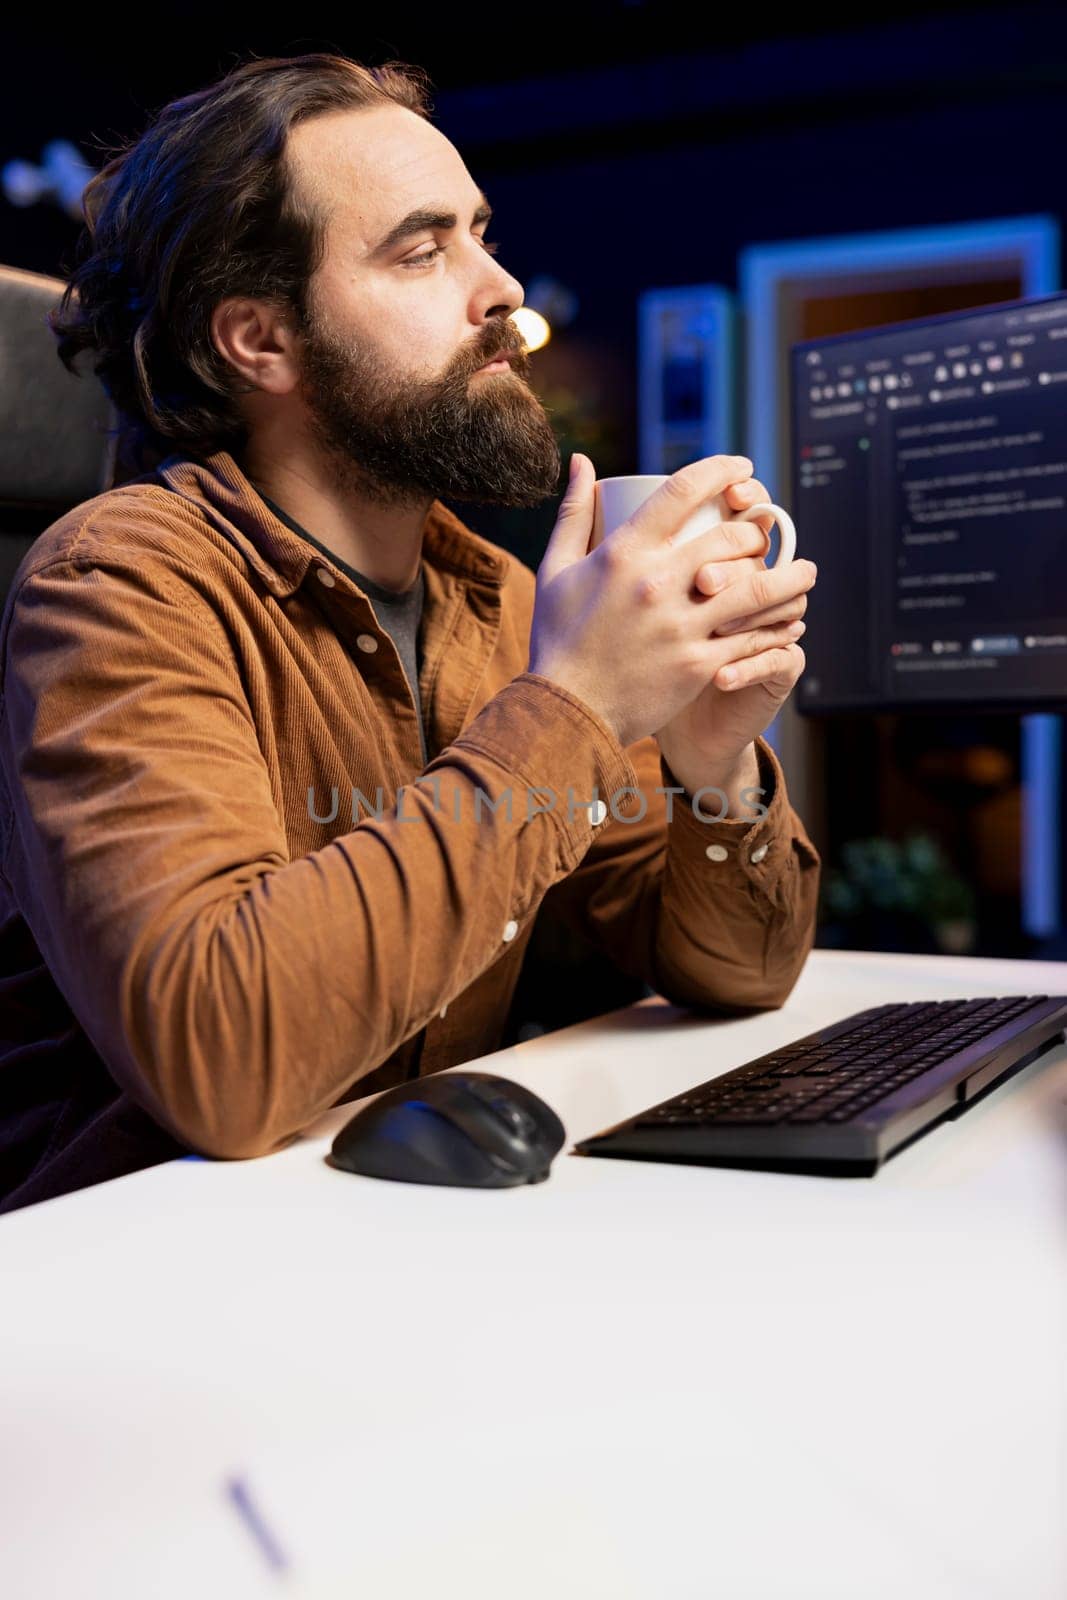 Programmer drinking coffee and writing lines of code filtering malicious traffic from cybercriminals attempting to steal company data. IT professional enjoying hot beverage, preventing malware